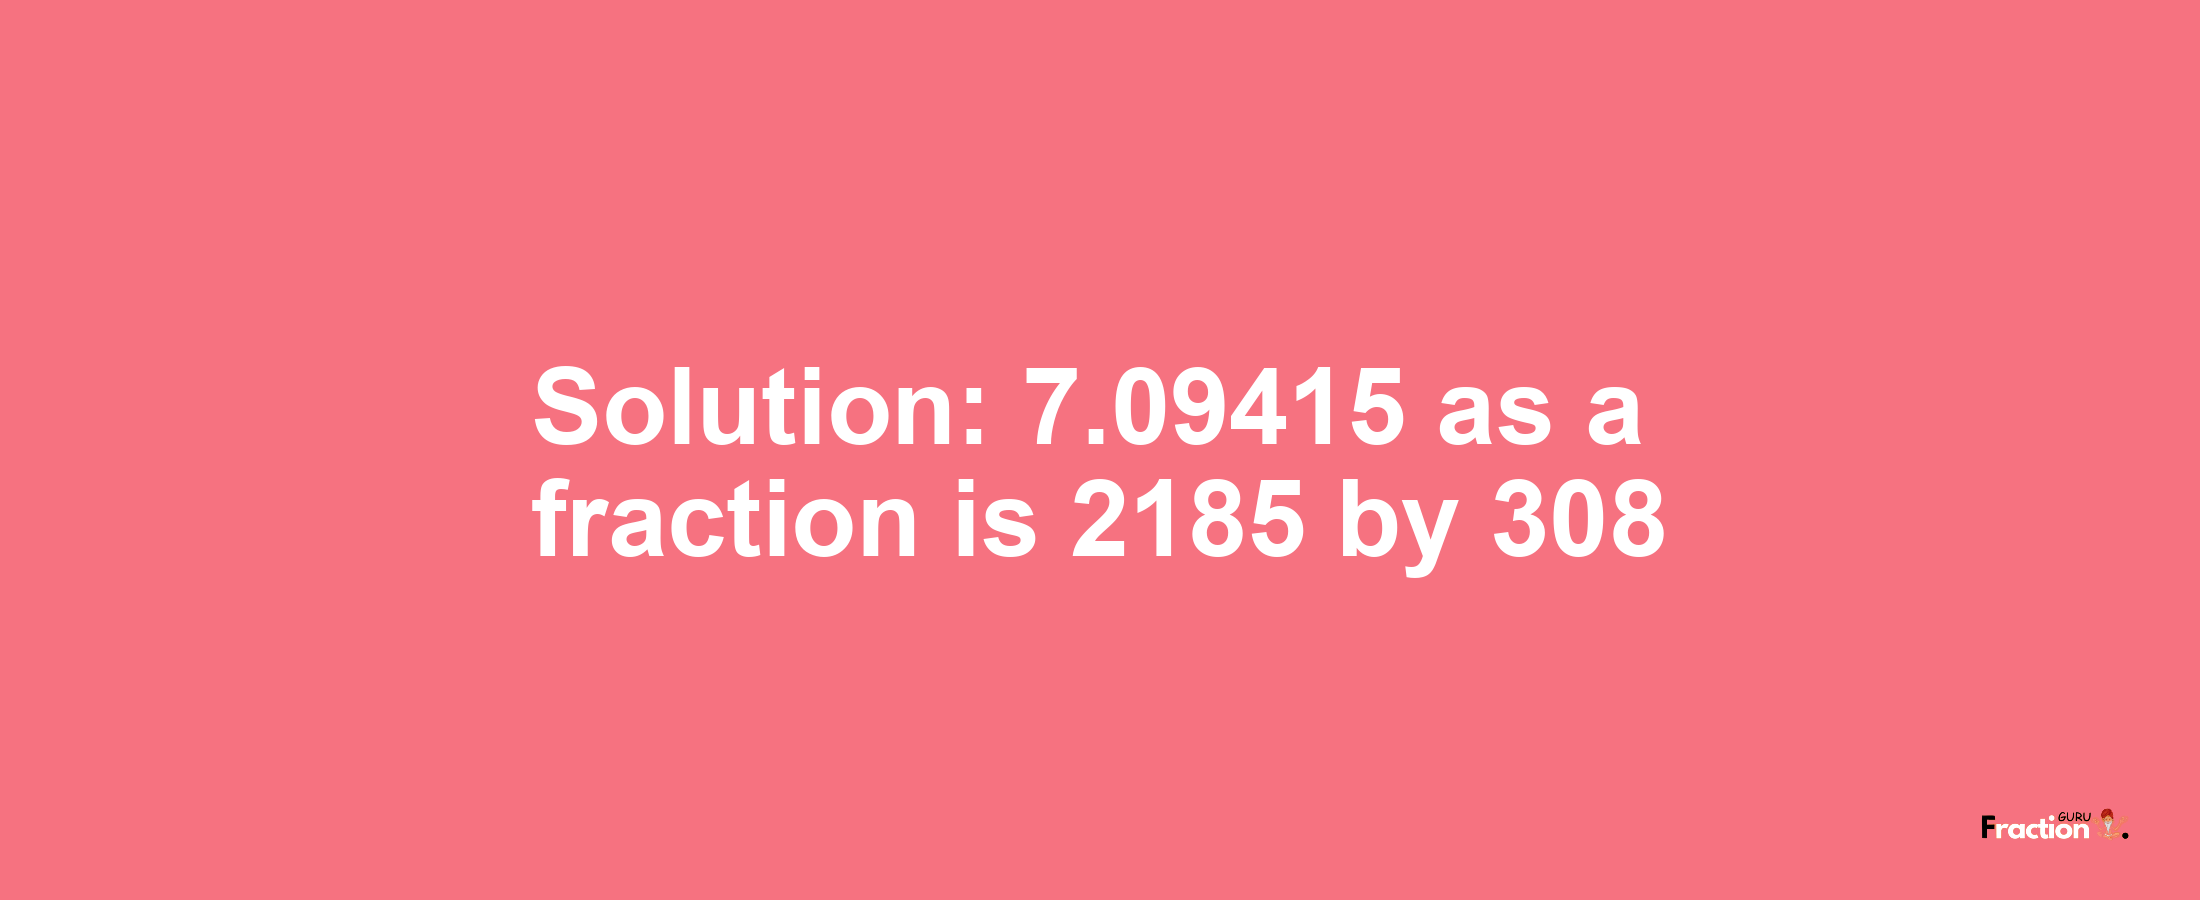 Solution:7.09415 as a fraction is 2185/308